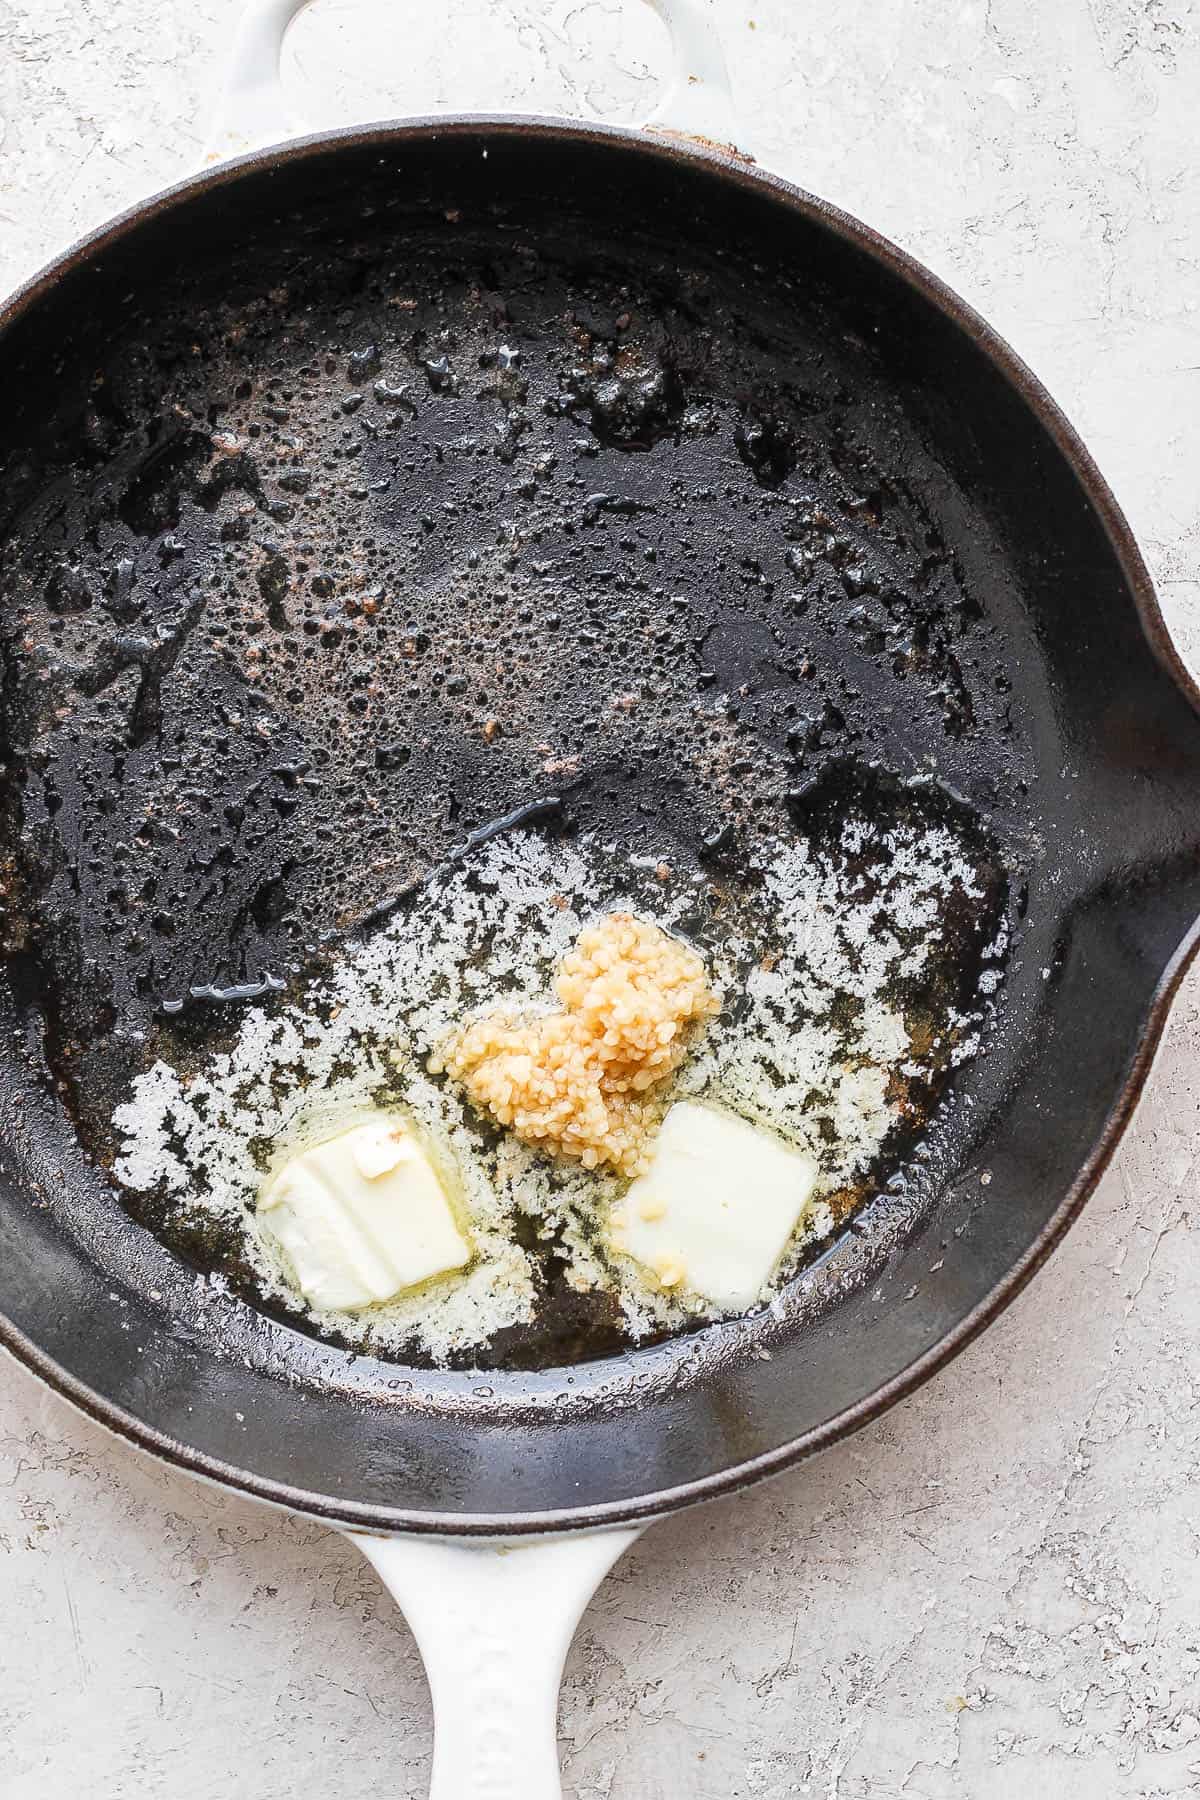 Butter melting with garlic in a cast iron skillet.